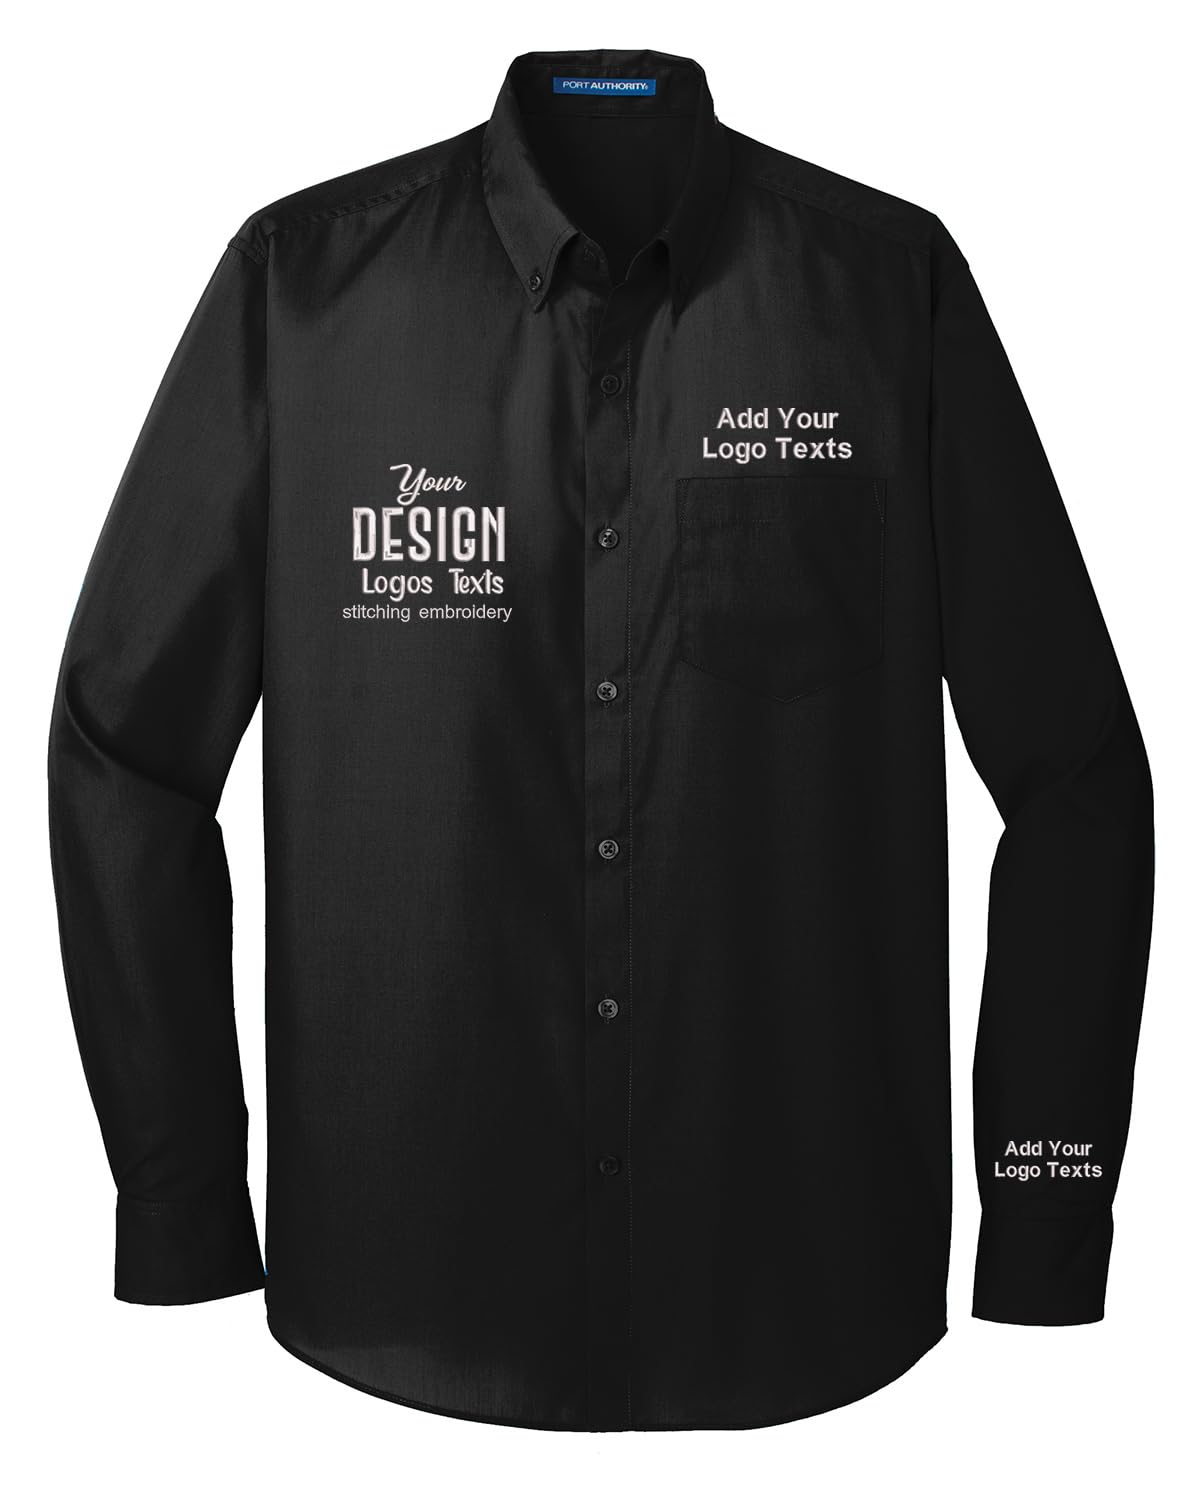 INK STITCH Men W100 Custom Personalized Embroidery Add Logo Texts Easy Care Long Sleeve Dress Buttondown Shirts